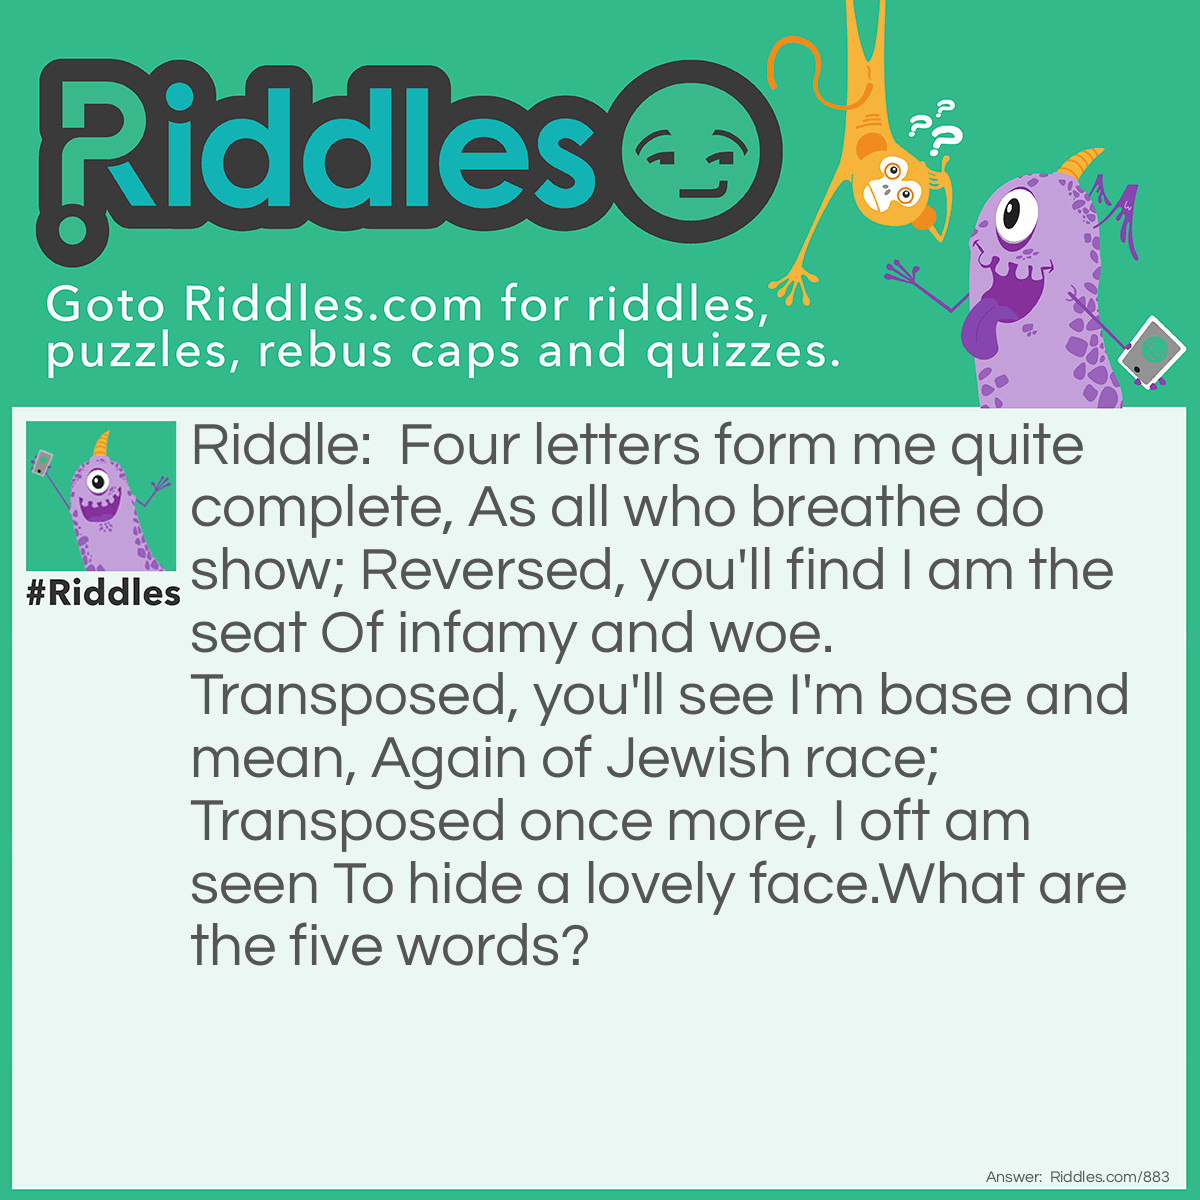 Riddle: Four letters form me quite complete, As all who breathe do show; Reversed, you'll find I am the seat Of infamy and woe. Transposed, you'll see I'm base and mean, Again of Jewish race; Transposed once more, I oft am seen To hide a lovely face.
What are the five words? Answer: Live, evil, vile, Levi, veil.
<div class="chapter"> </div>